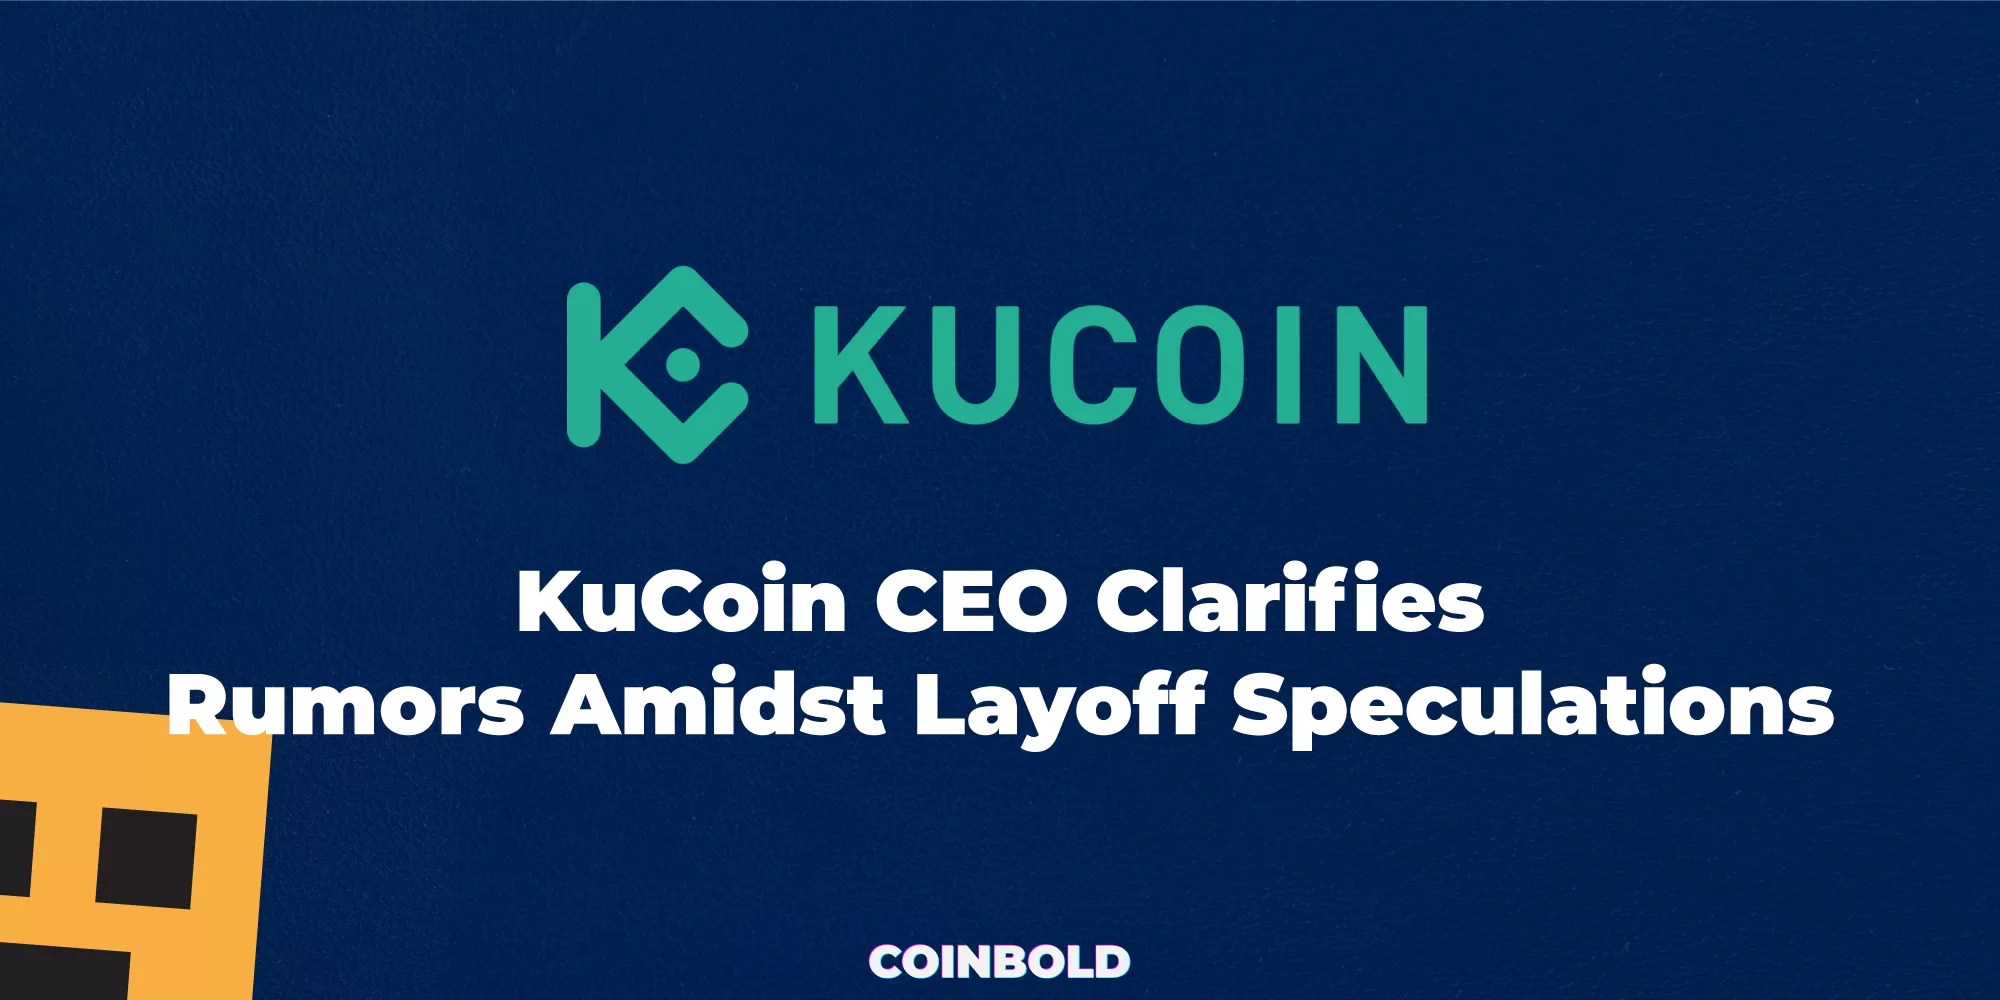 KuCoin CEO Clarifies Rumors Amidst Layoff Speculations